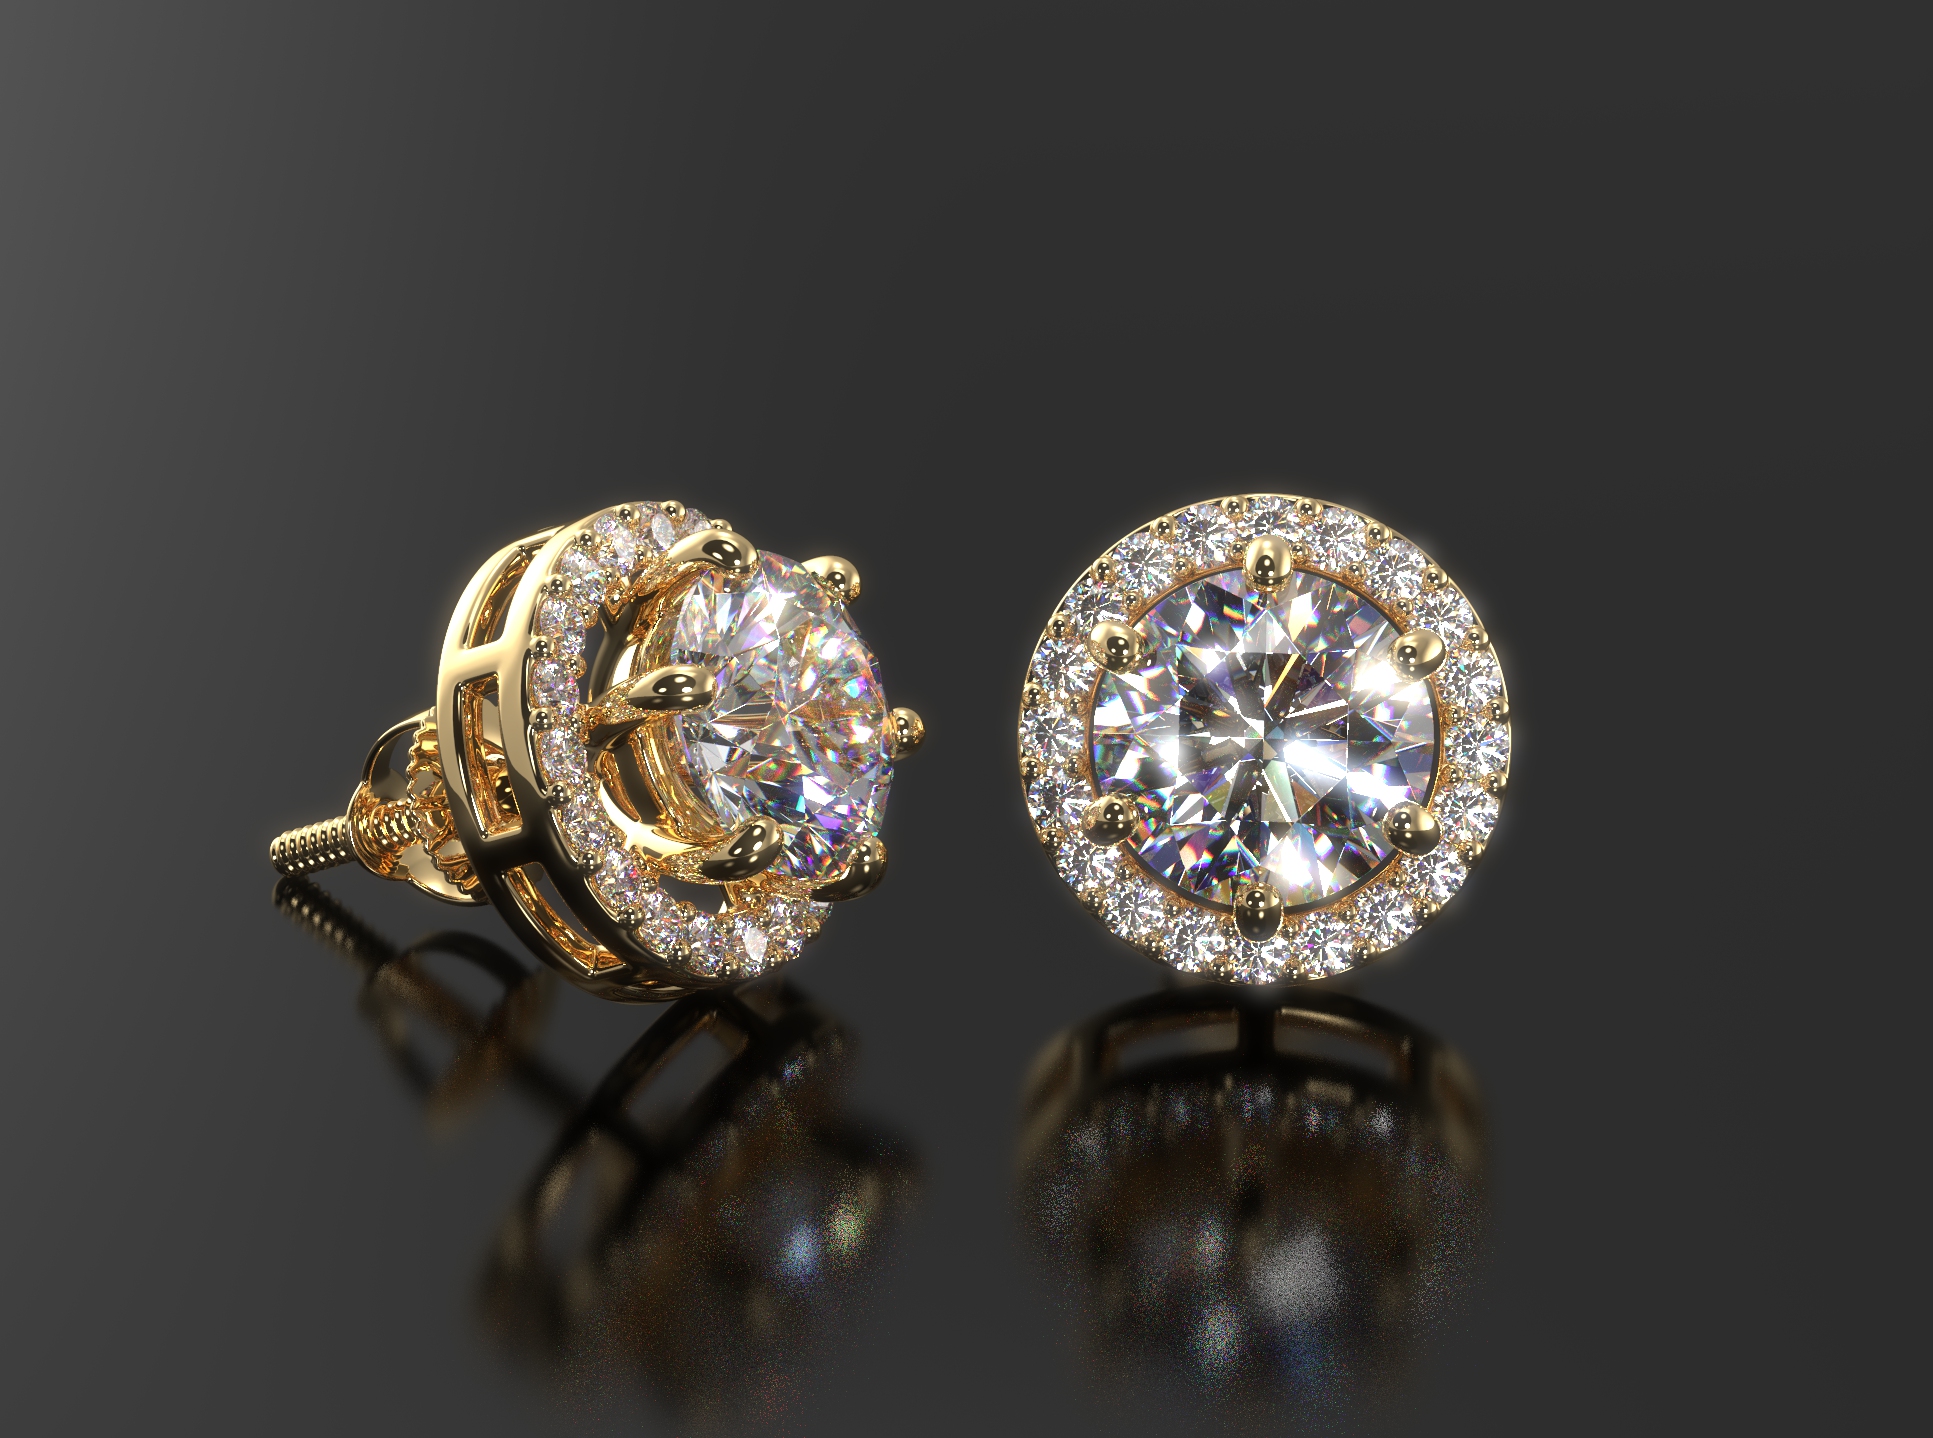 Jewelry Rendering Services India l 3D Product Rendering Services